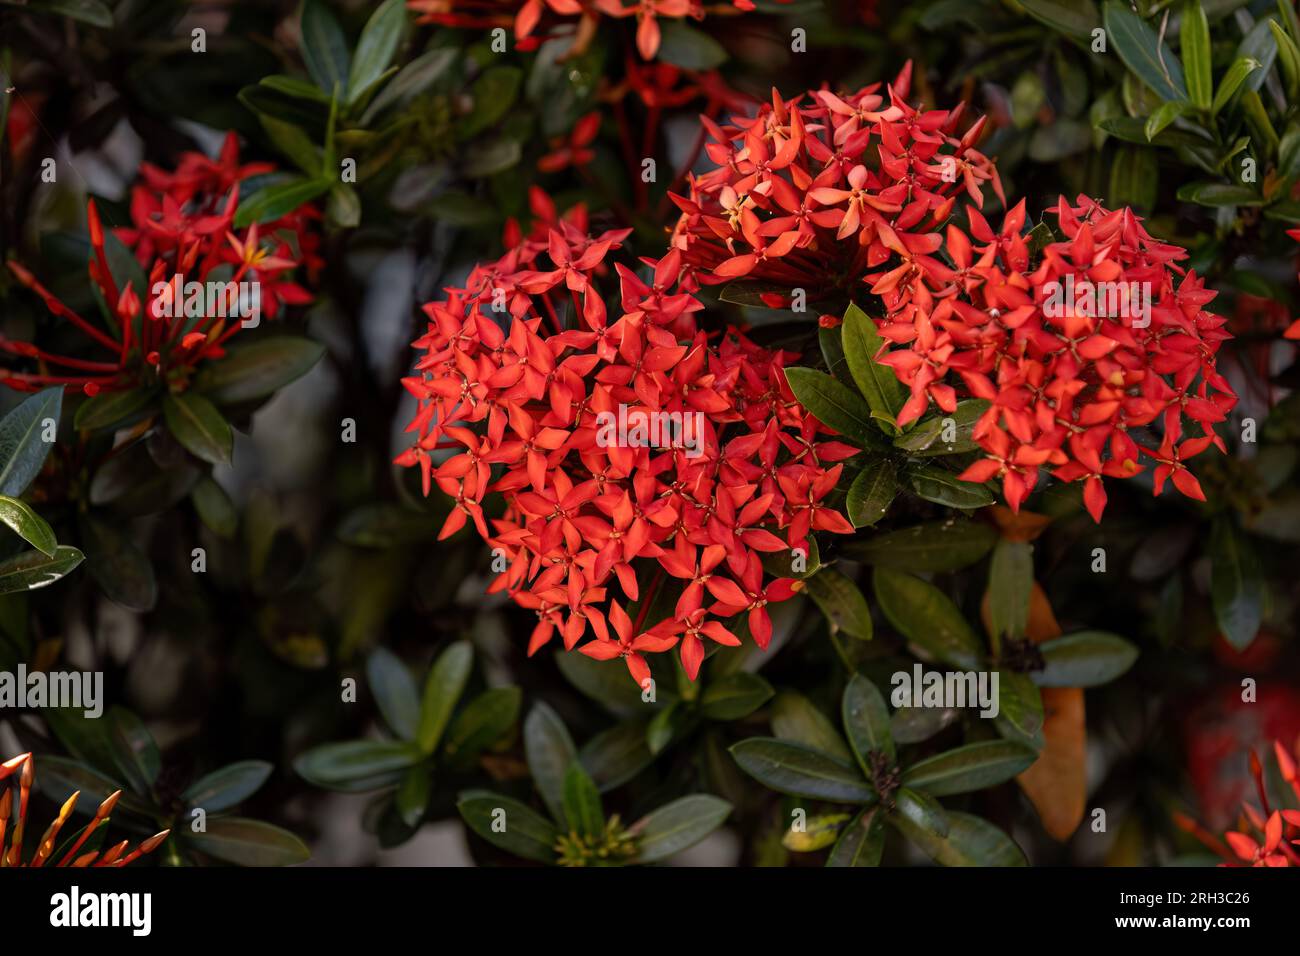 Red Jungle Flame Plant Flower of the genus Ixora Stock Photo